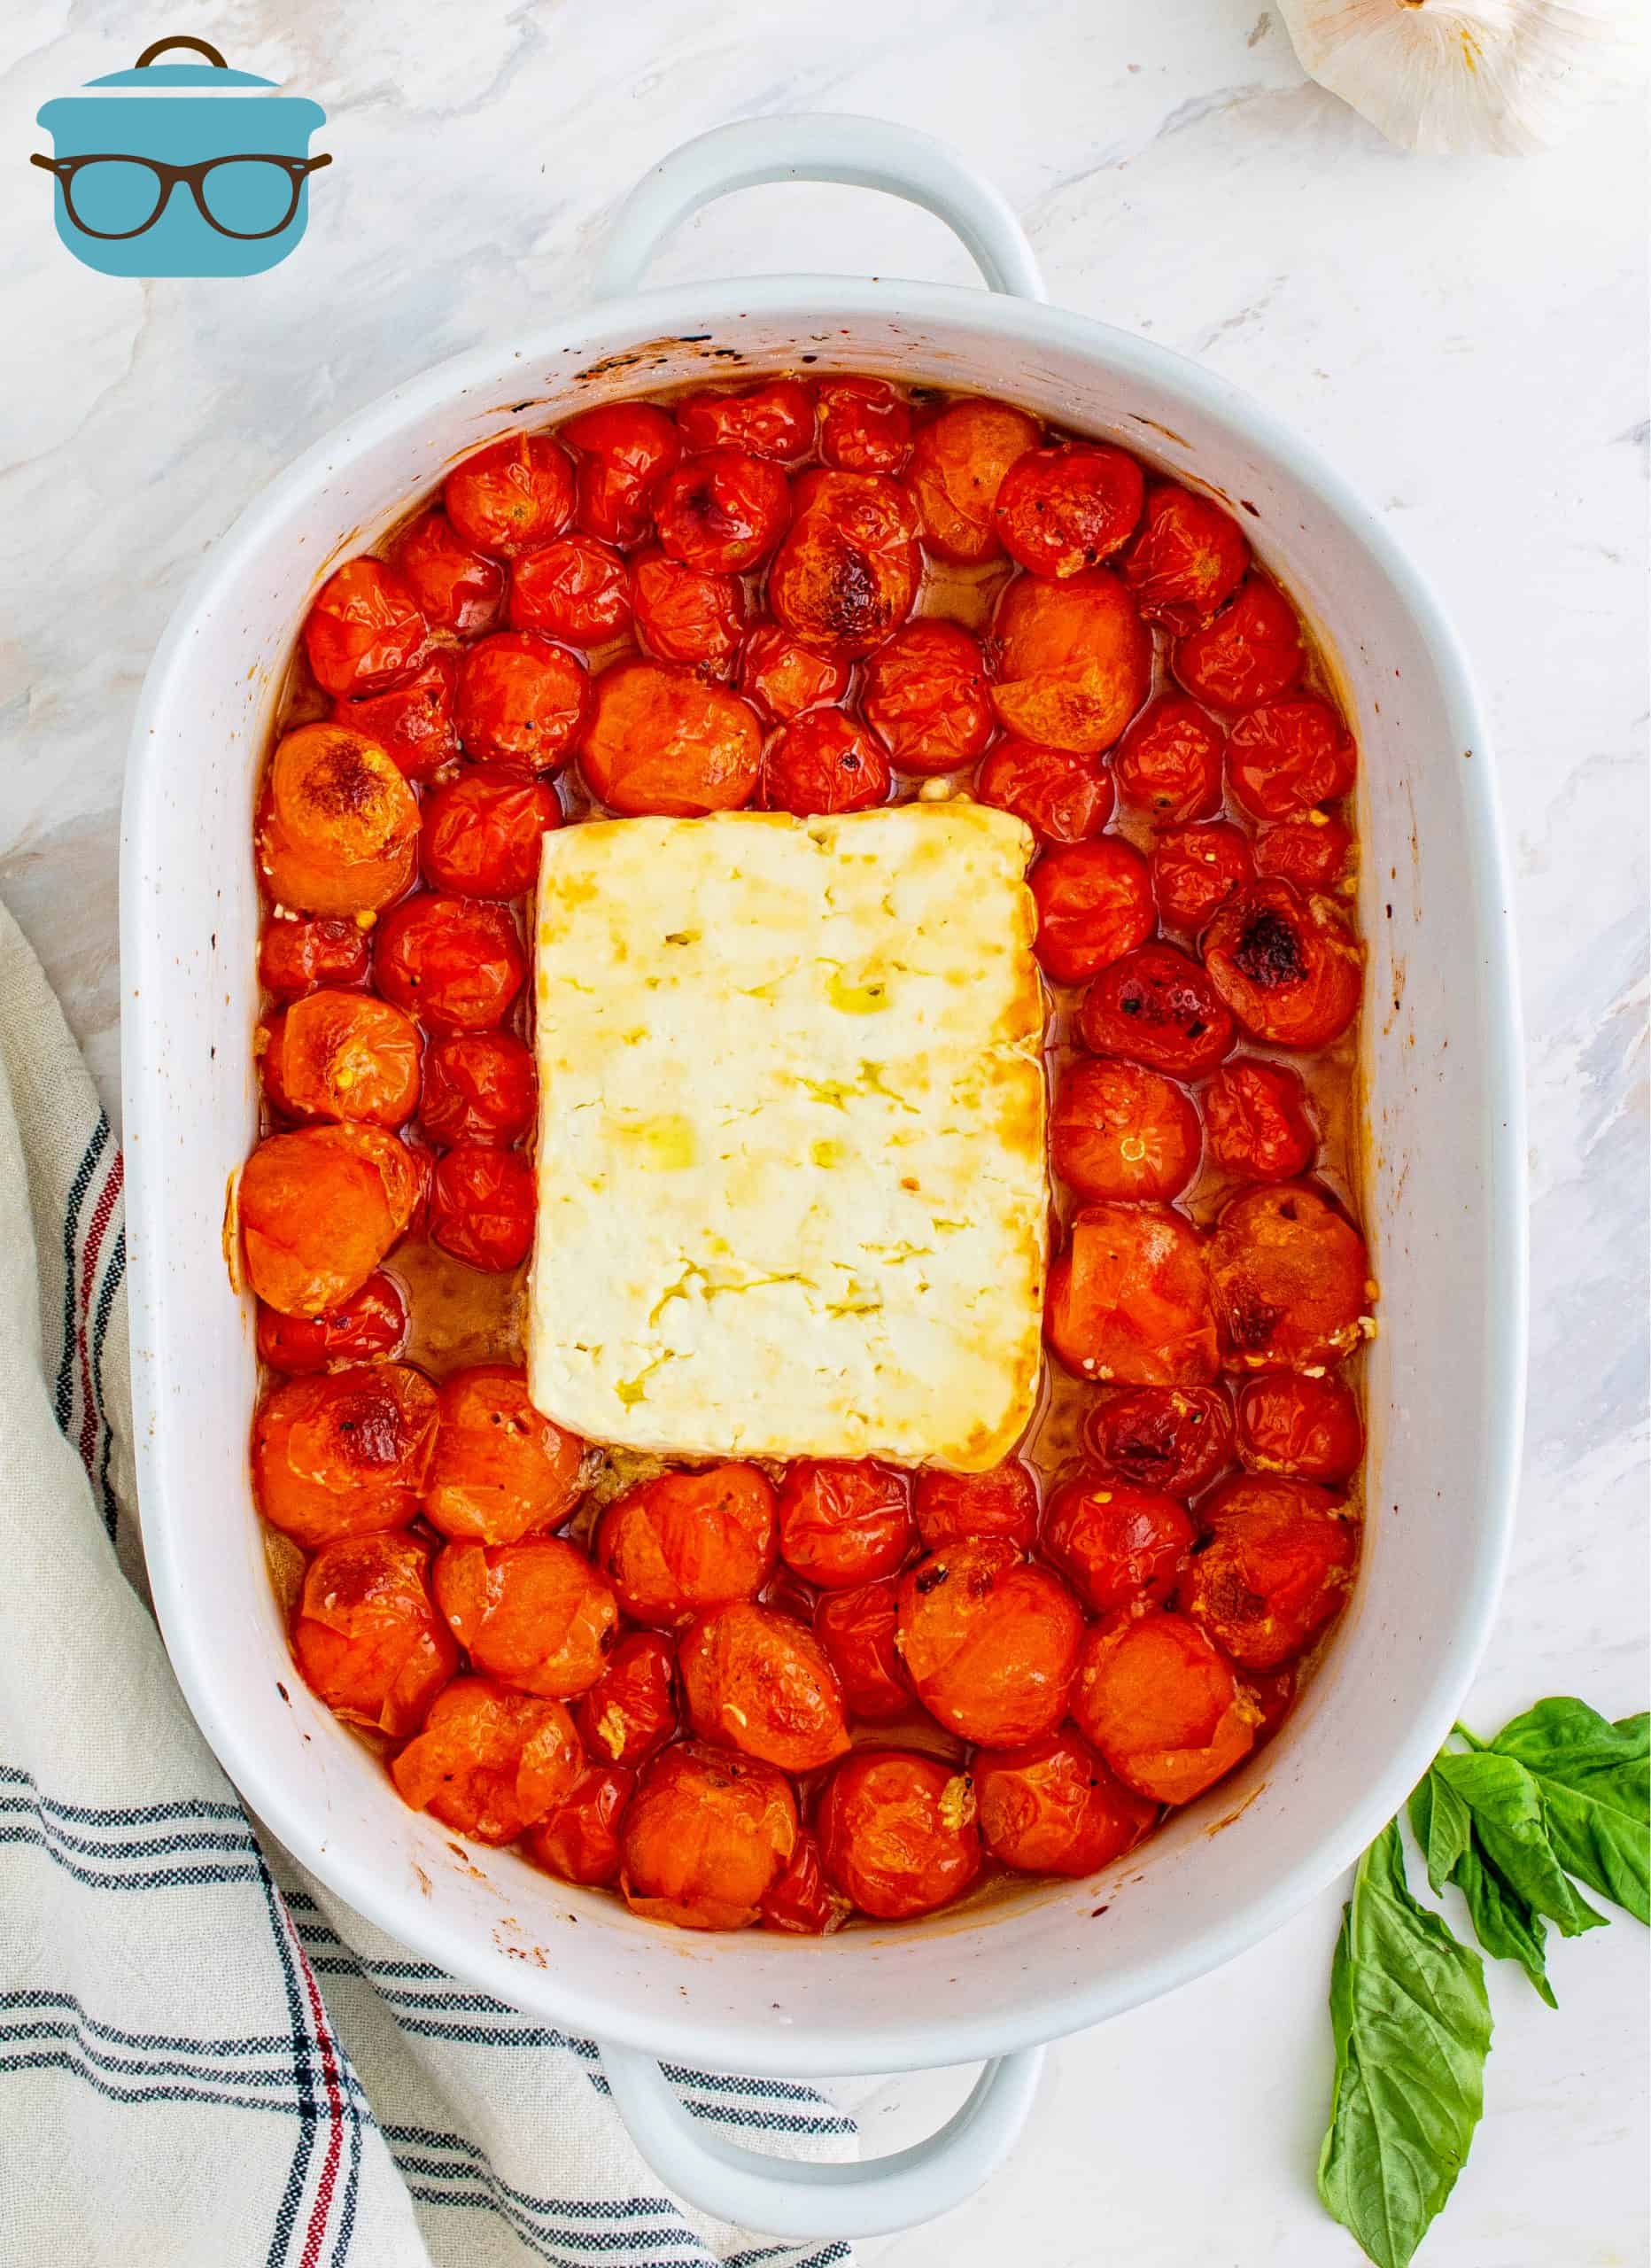 roasted feta cheese and tomatoes shown in an oval white baking dish.